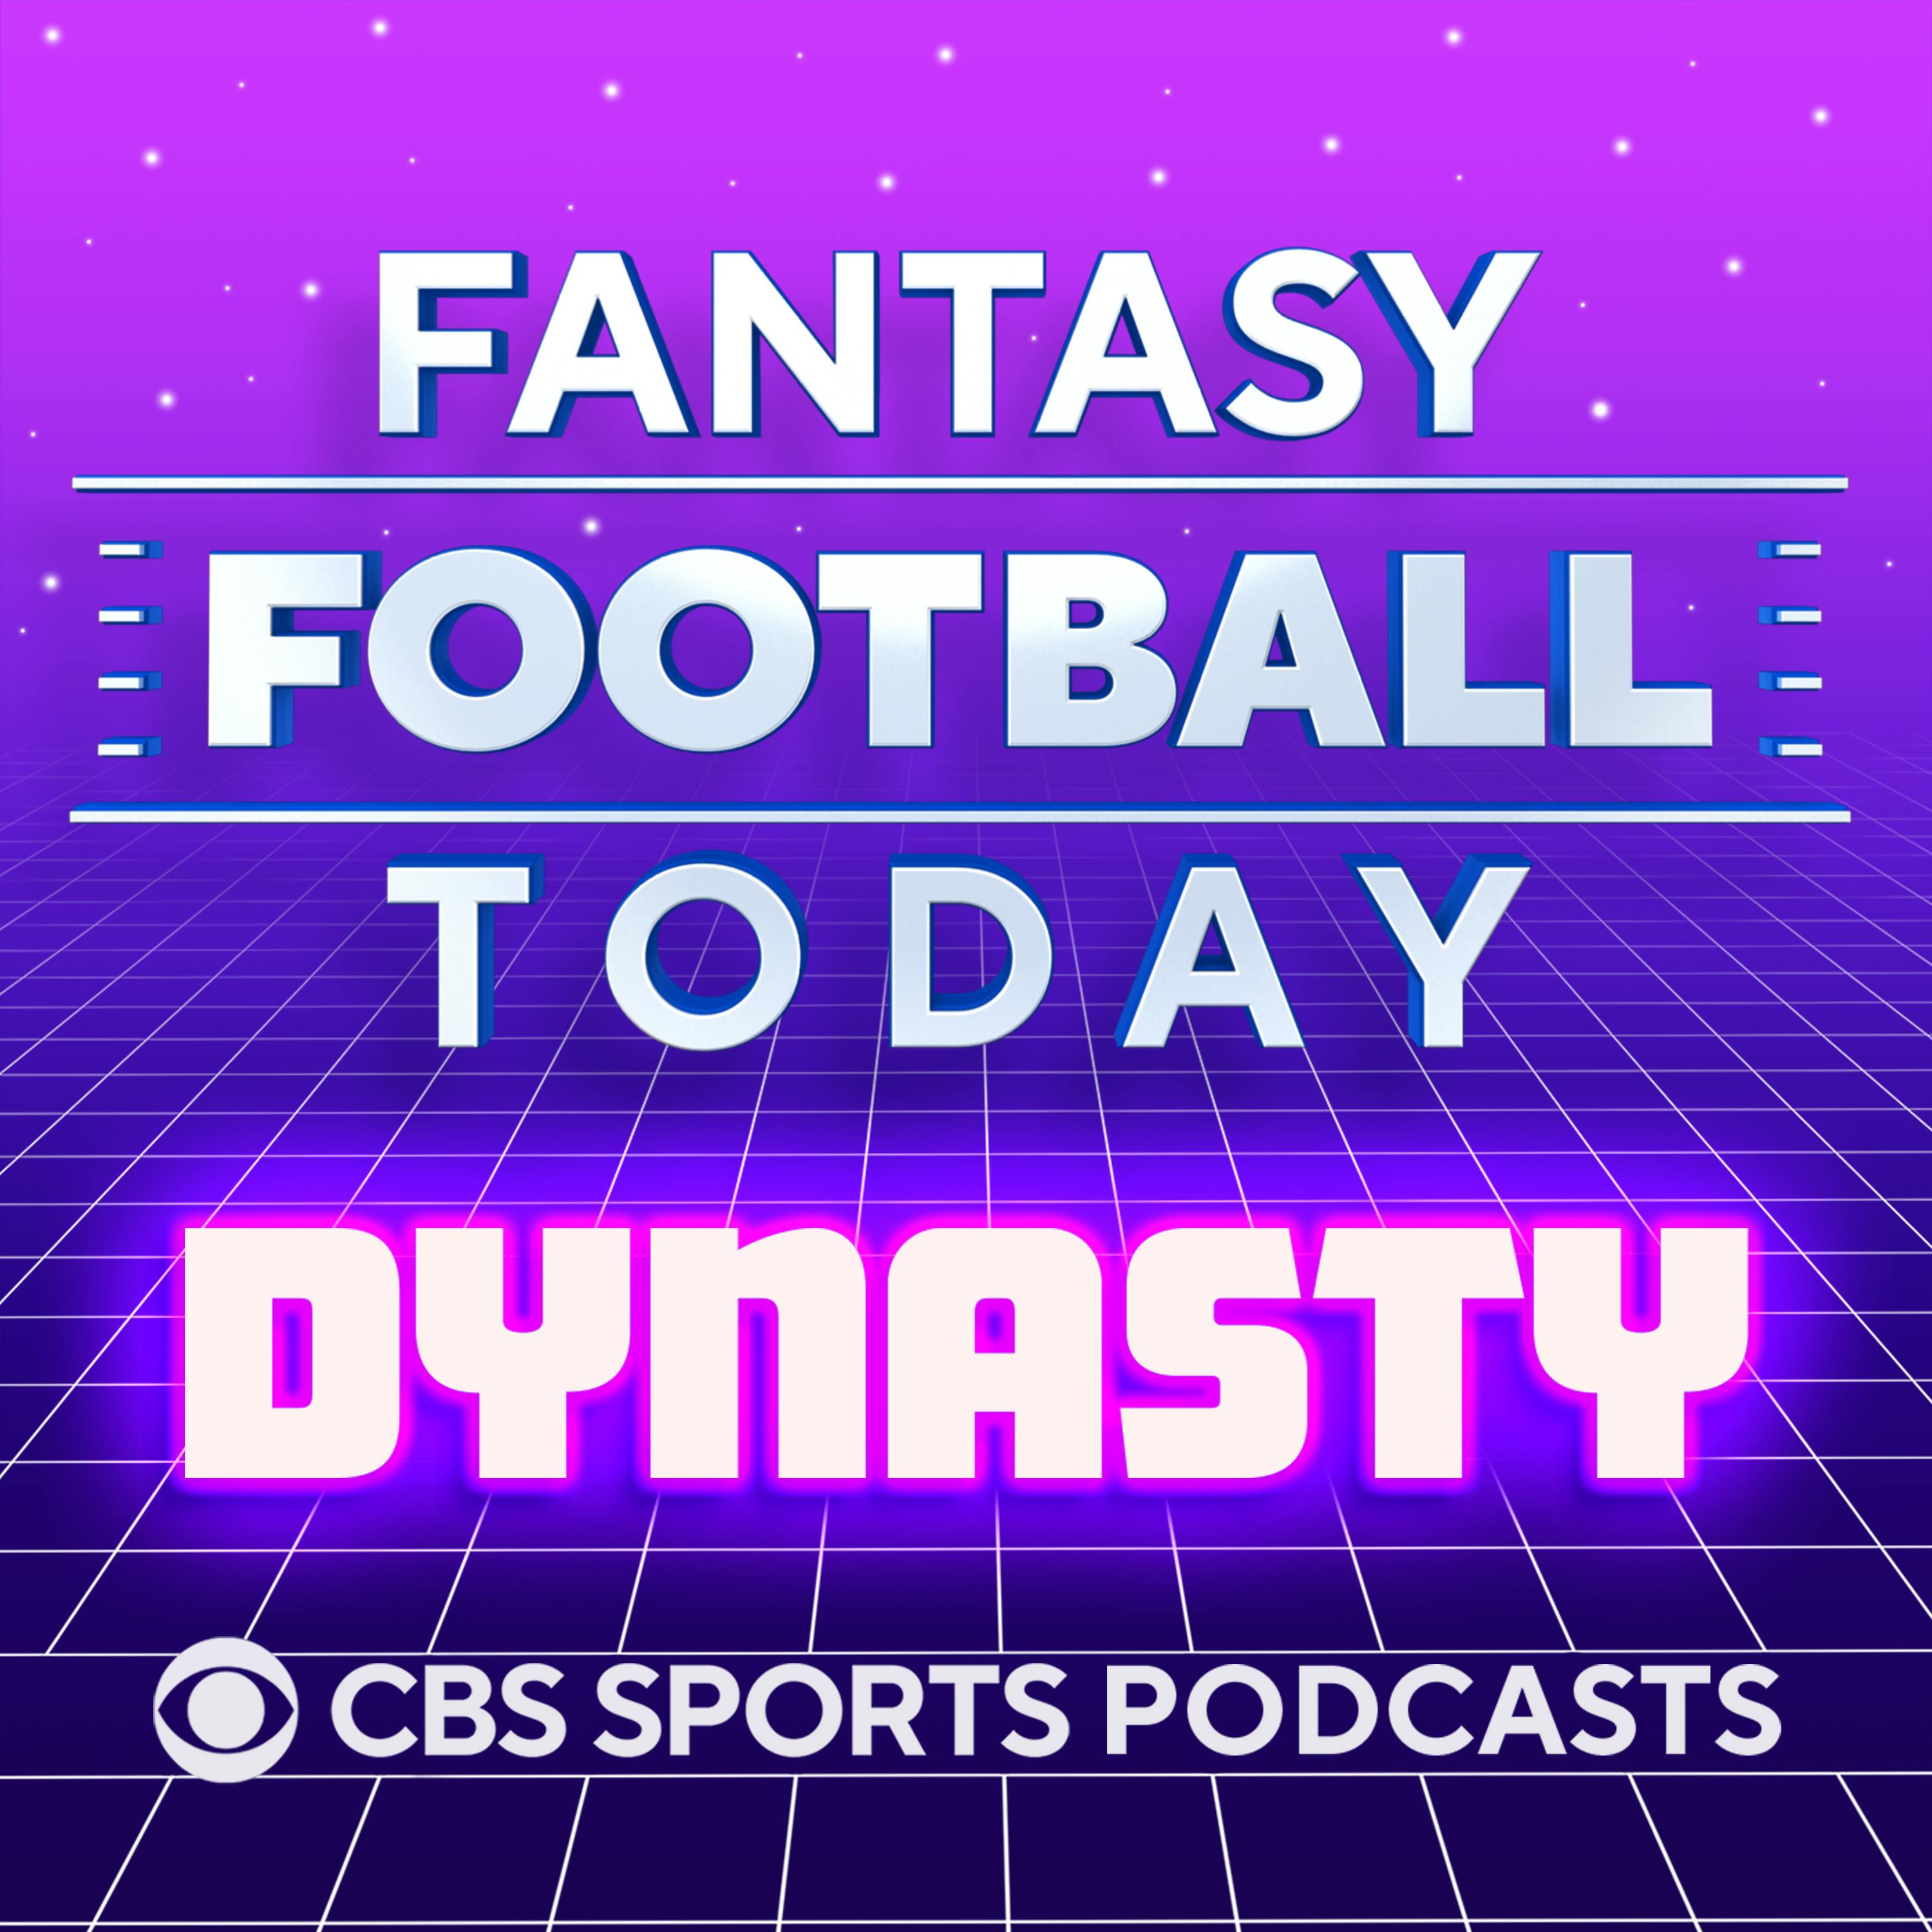 FFT Dynasty - Rookie Rankings & Rookie-Only Mock Draft Review (04/30 Dynasty Fantasy Football Podcast)